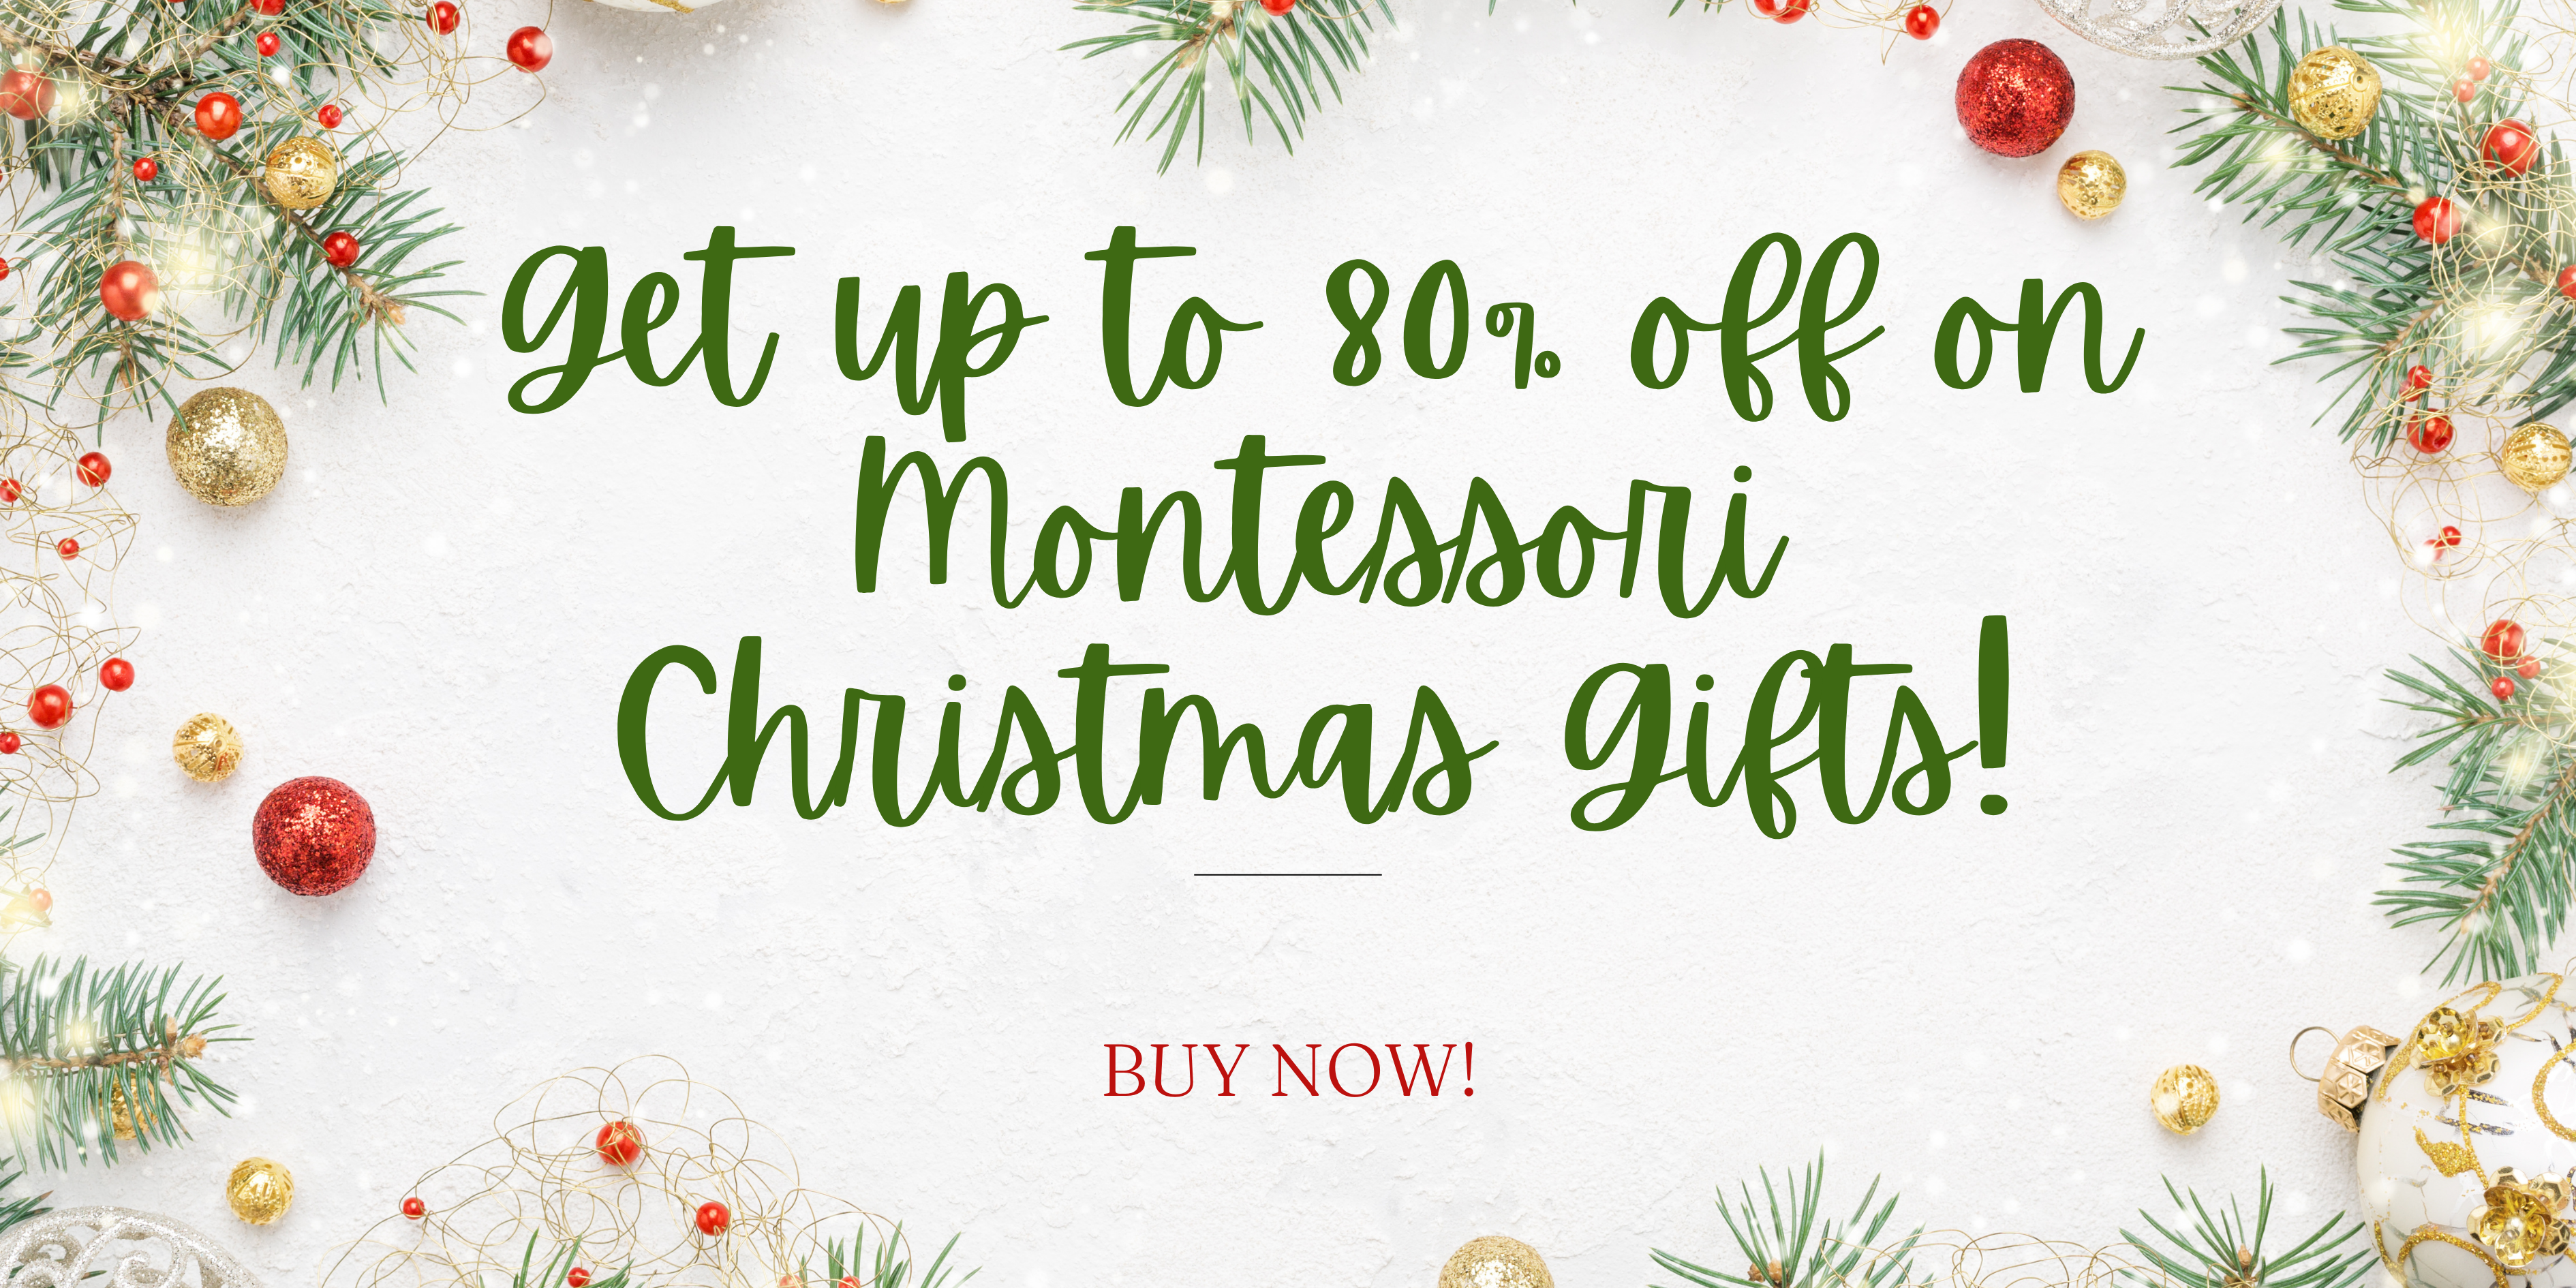 Elevate Your Holiday Gifting Experience with Up to 80% Off on Montessori Christmas Gifts